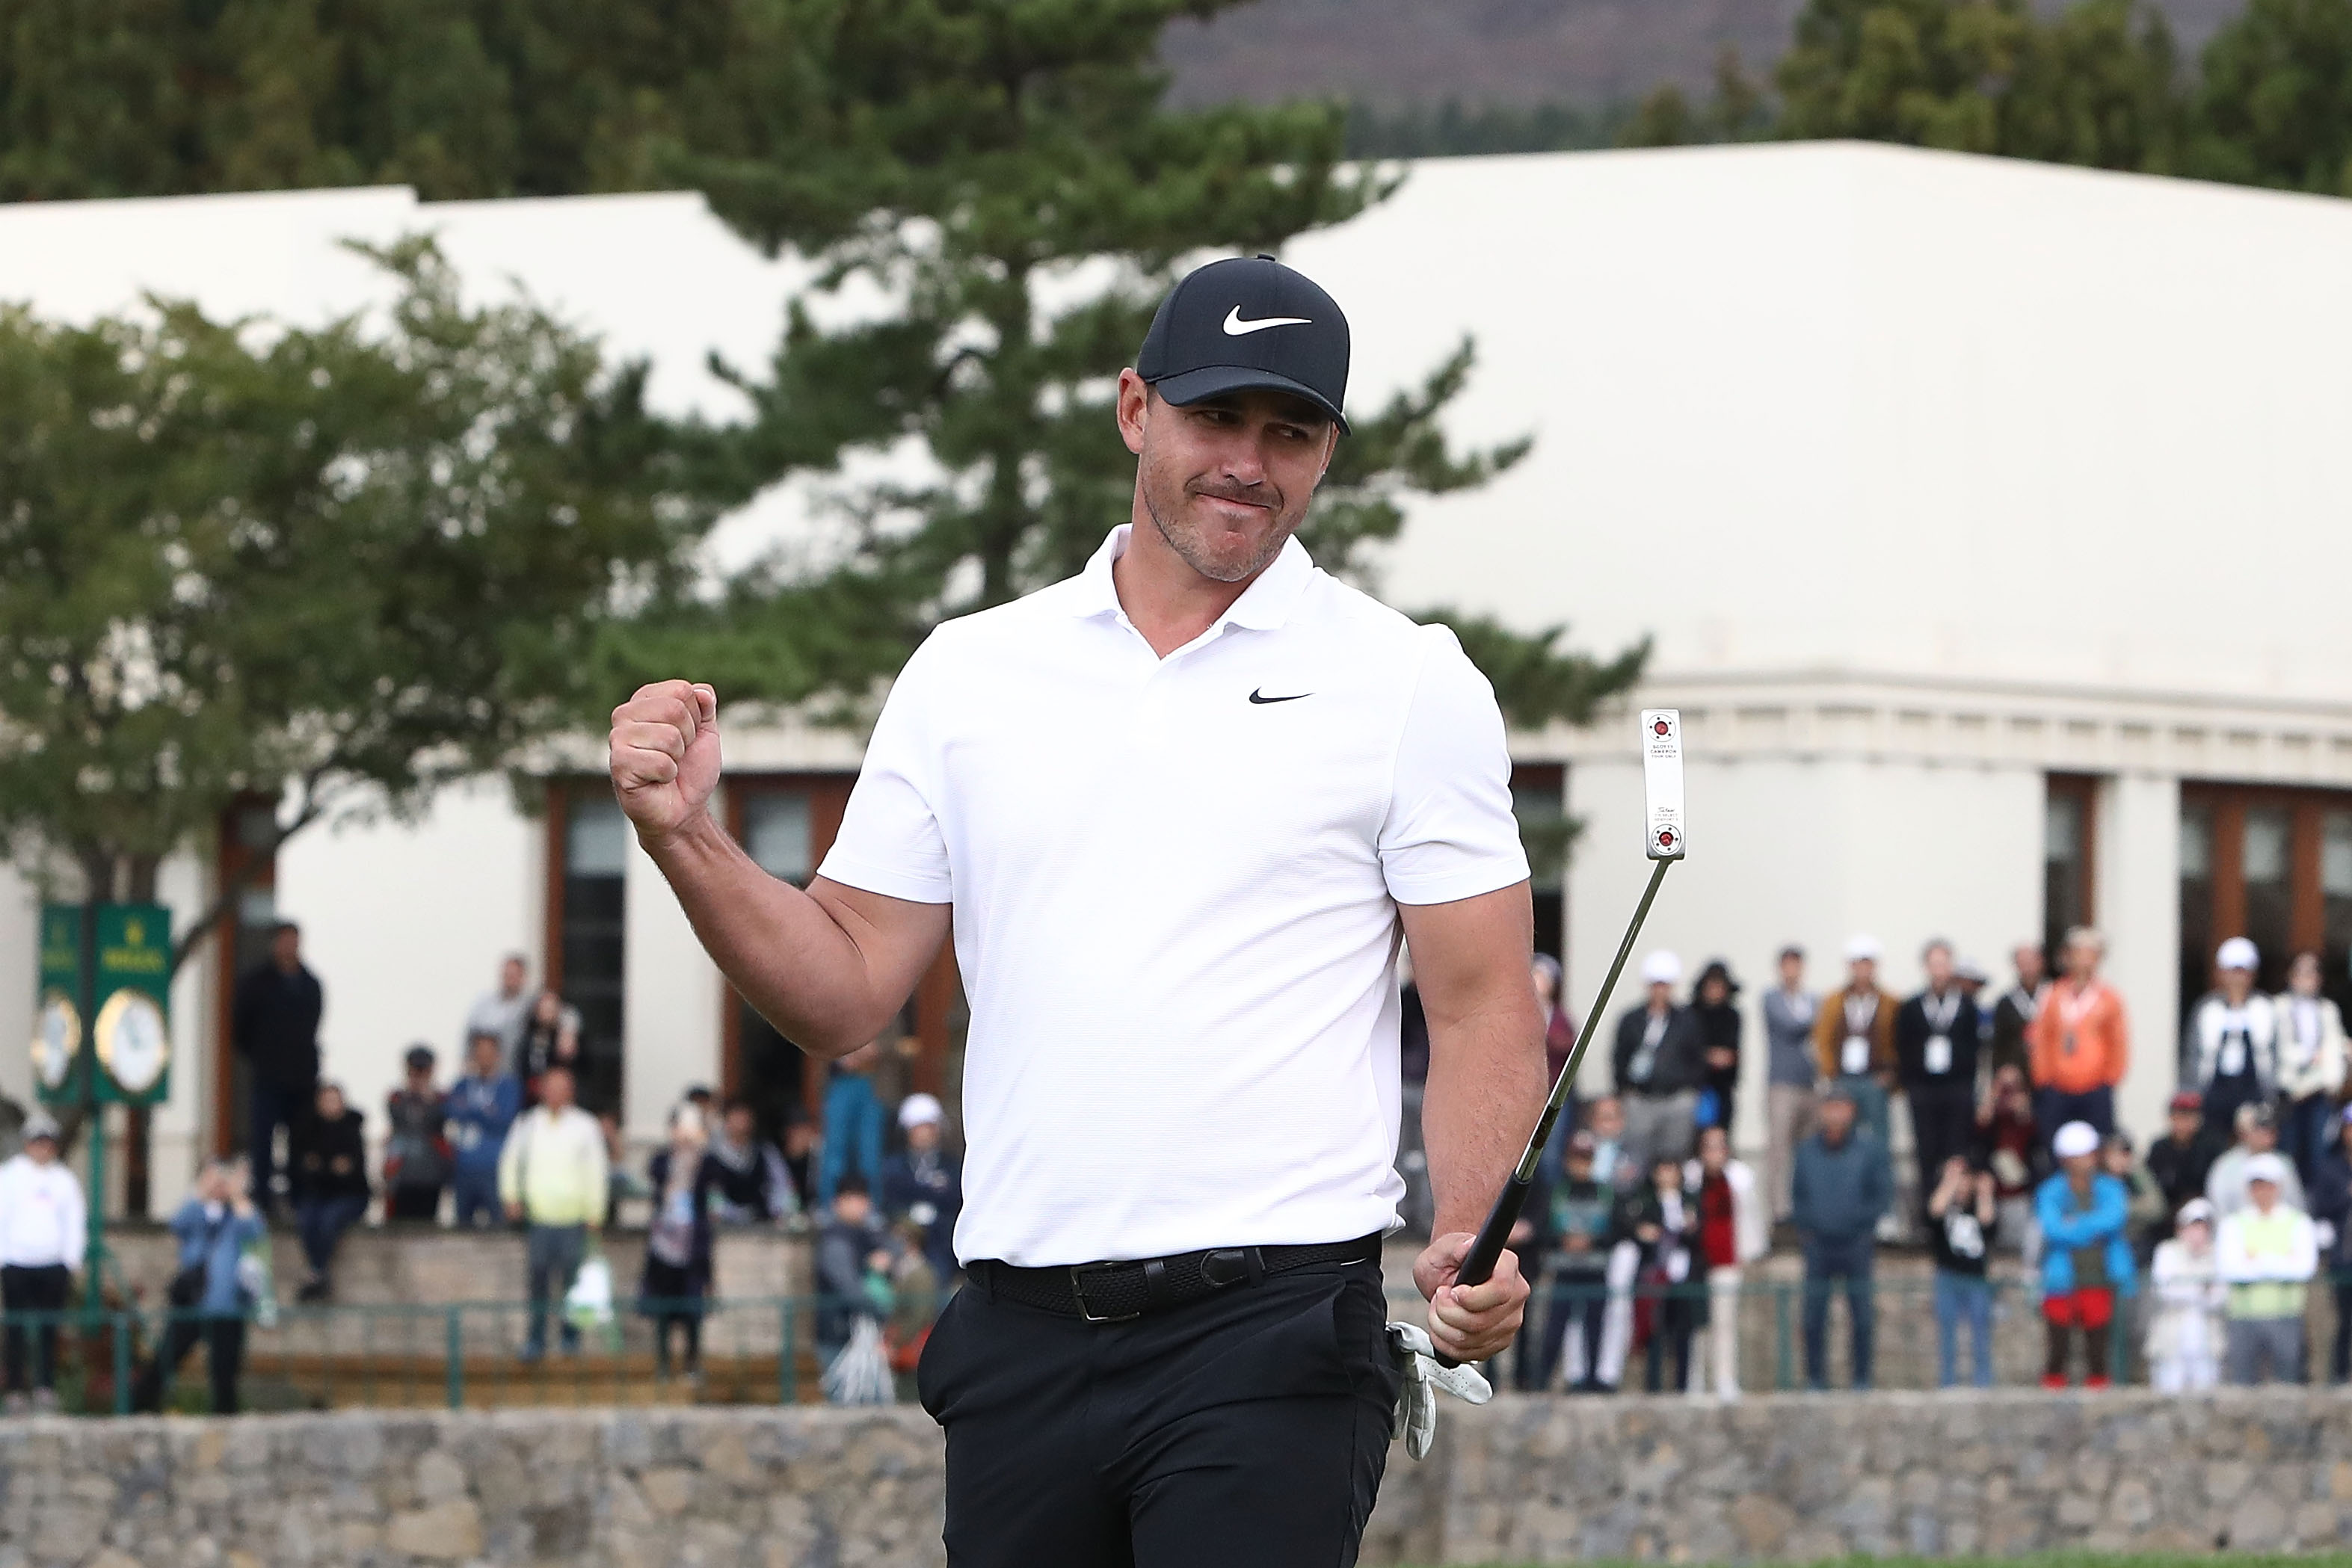 Brooks Koepka is new World No. 1 after four-stroke victory at CJ Cup